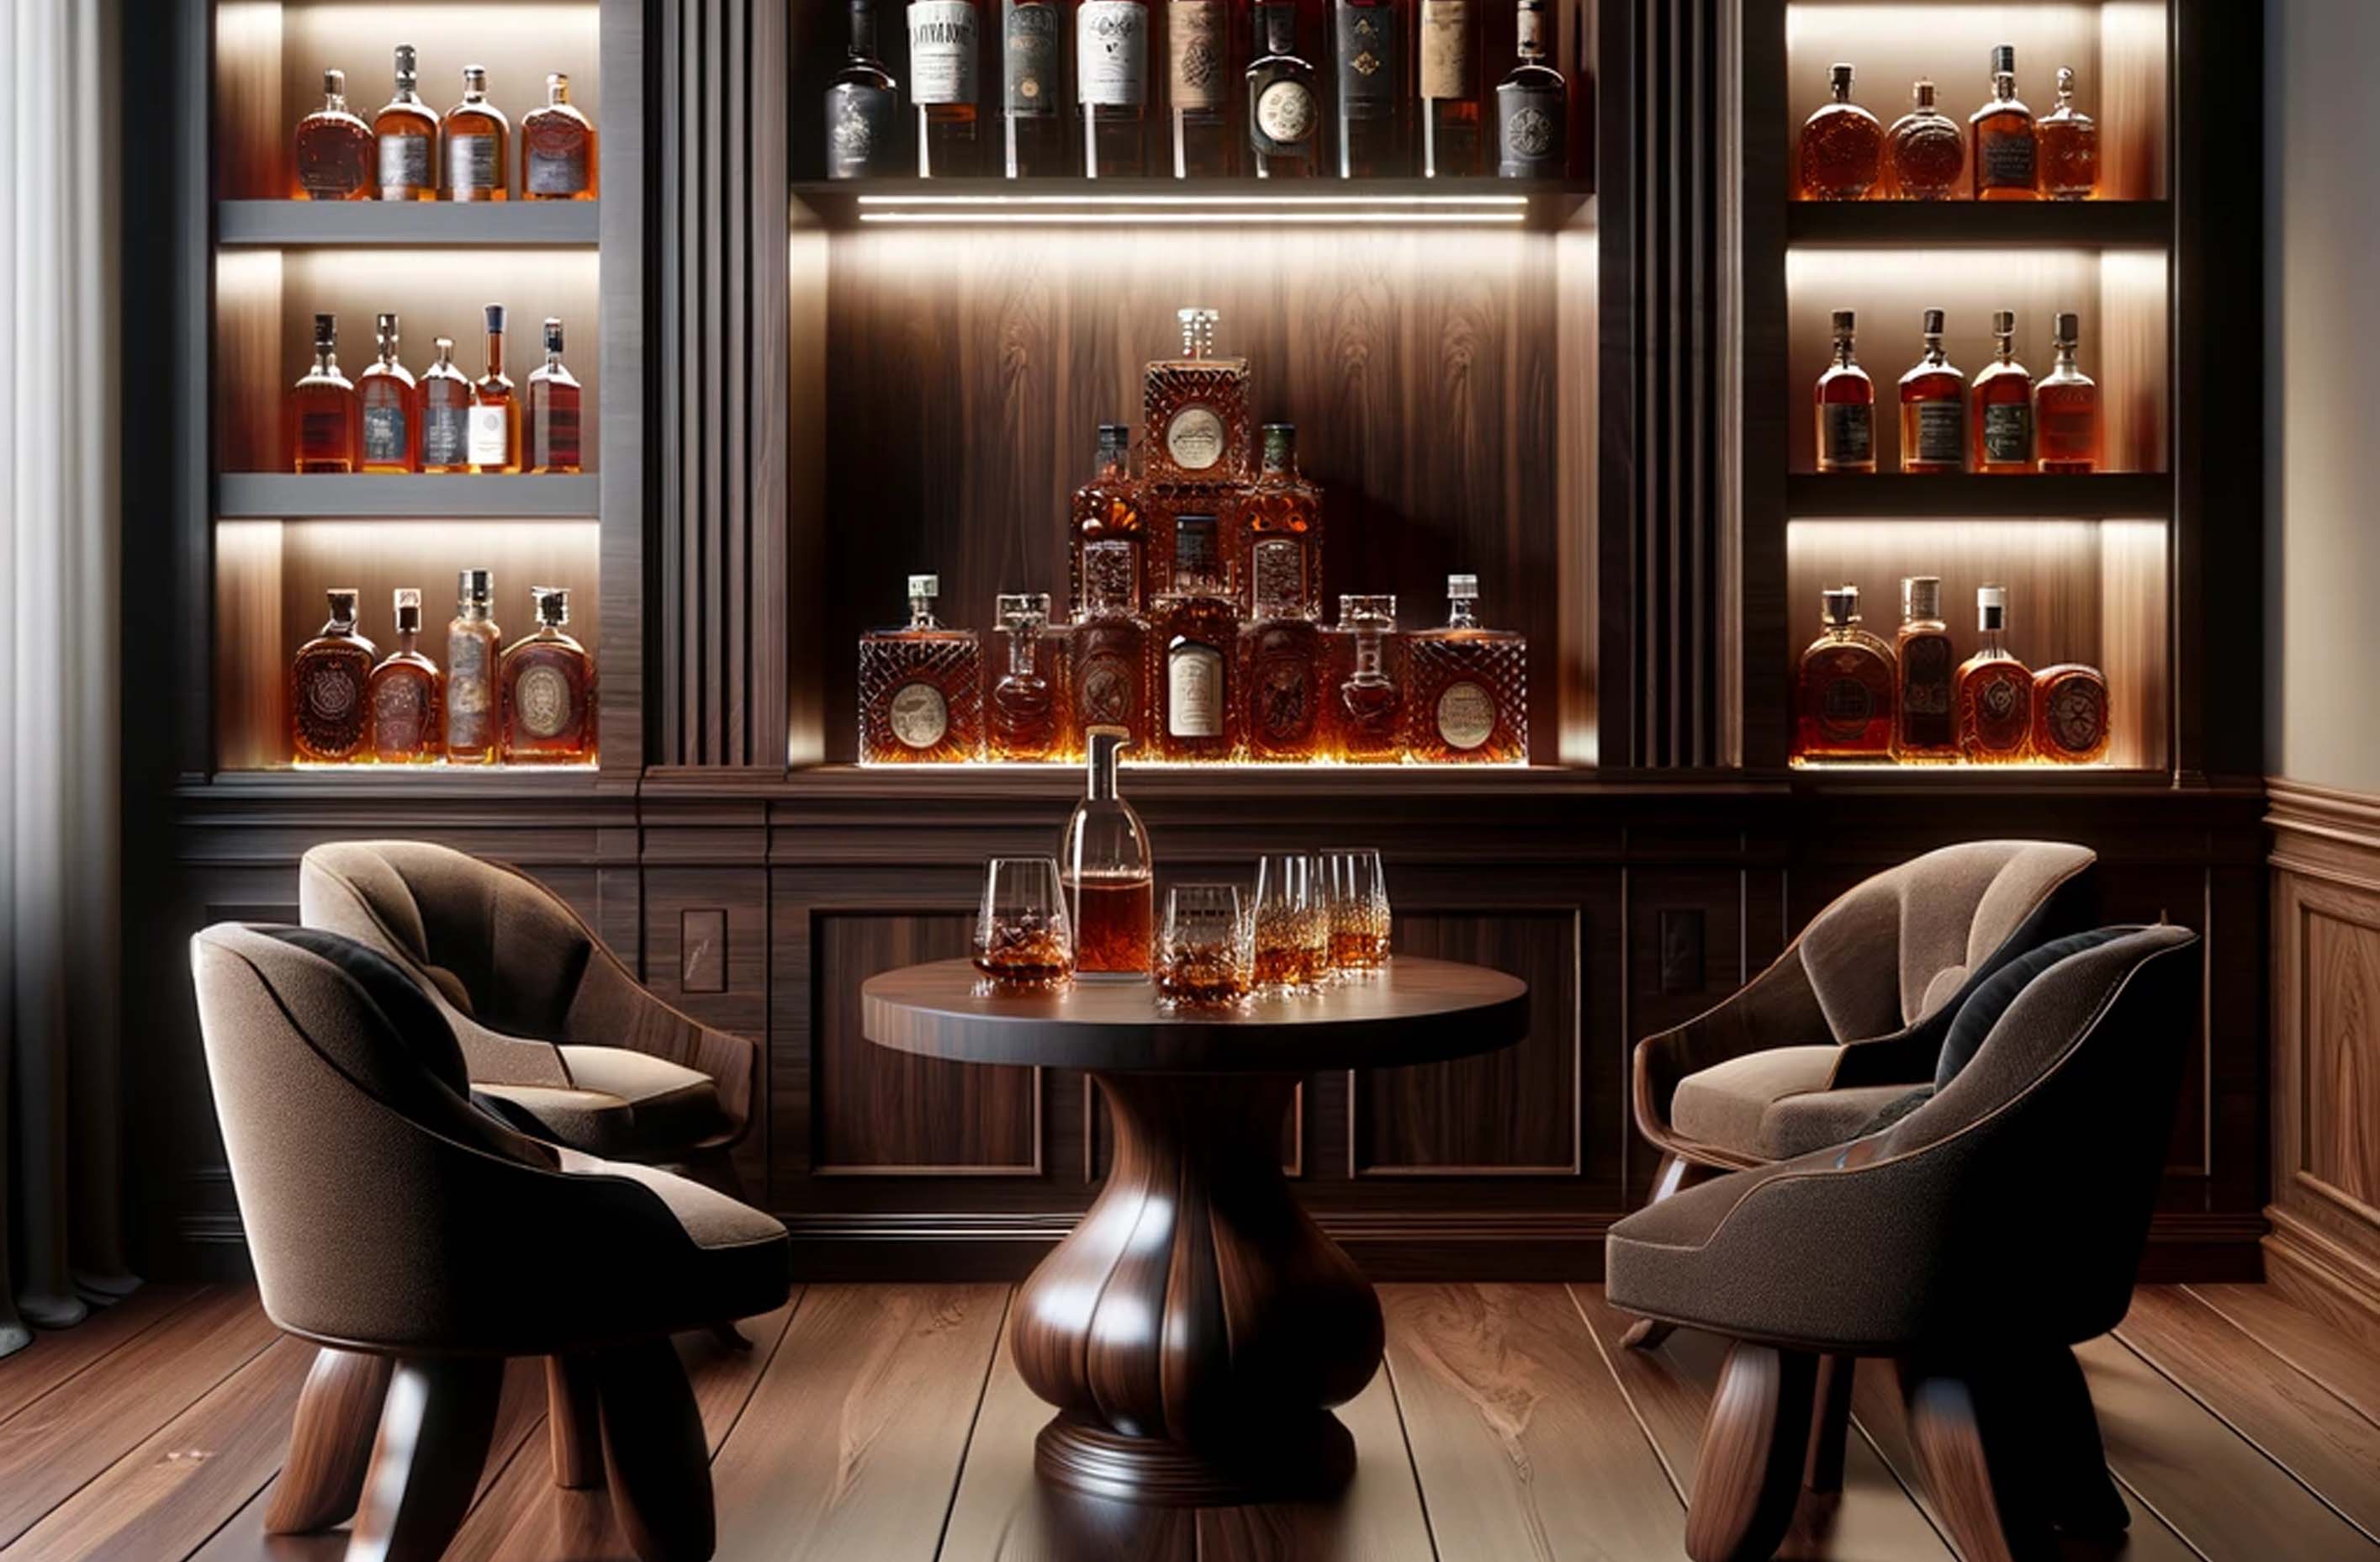 Carbon Heritage showcasing the finest whiskey lounge